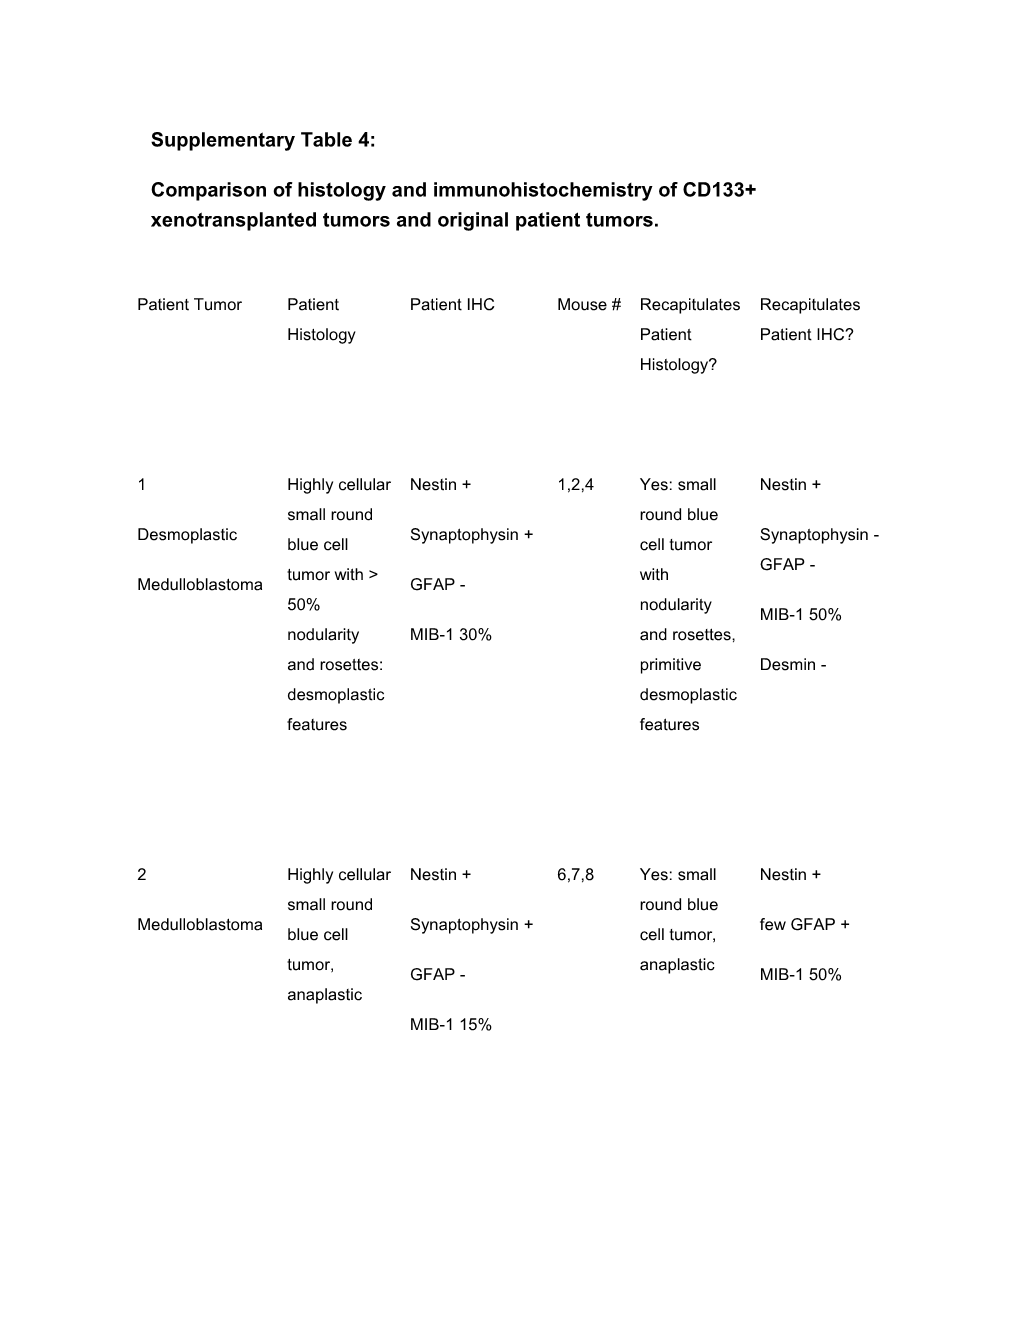 Table 4: Comparison of Histology and Mmunohistochemistry of Cd133+ Xenotransplanted Tumors